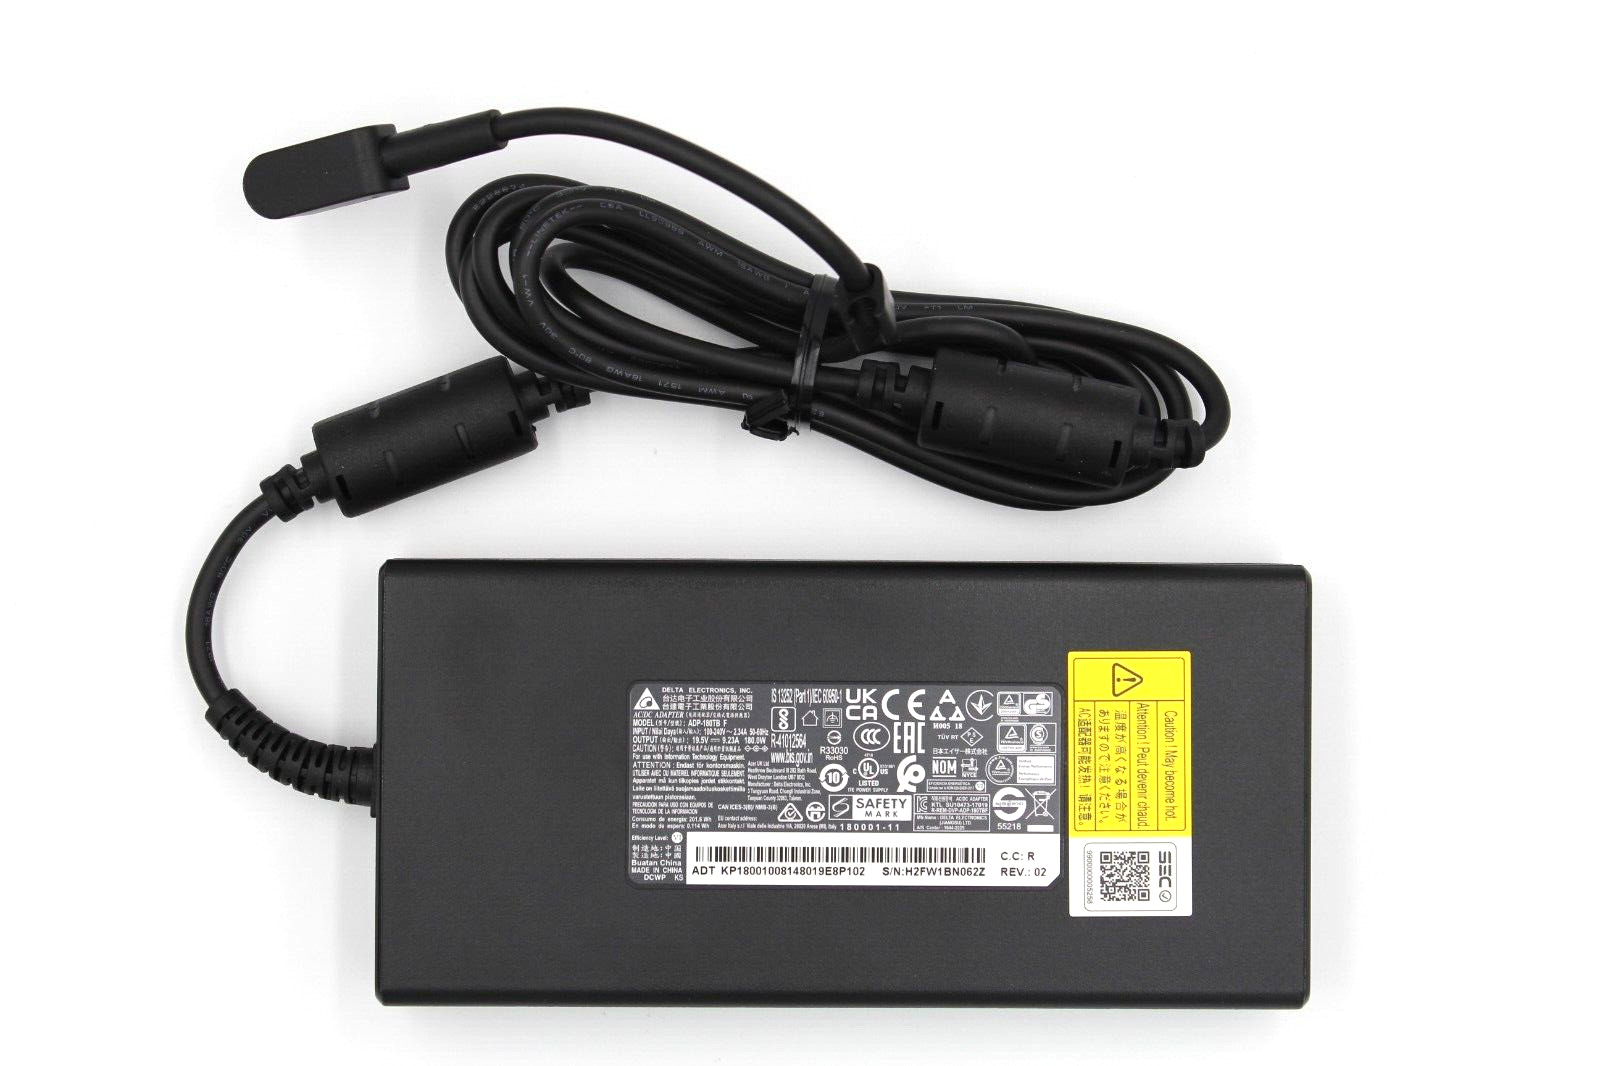 Genuine NEW Acer Charger ADP-180TB F KP.18001.008 19.5 V 9.23 A